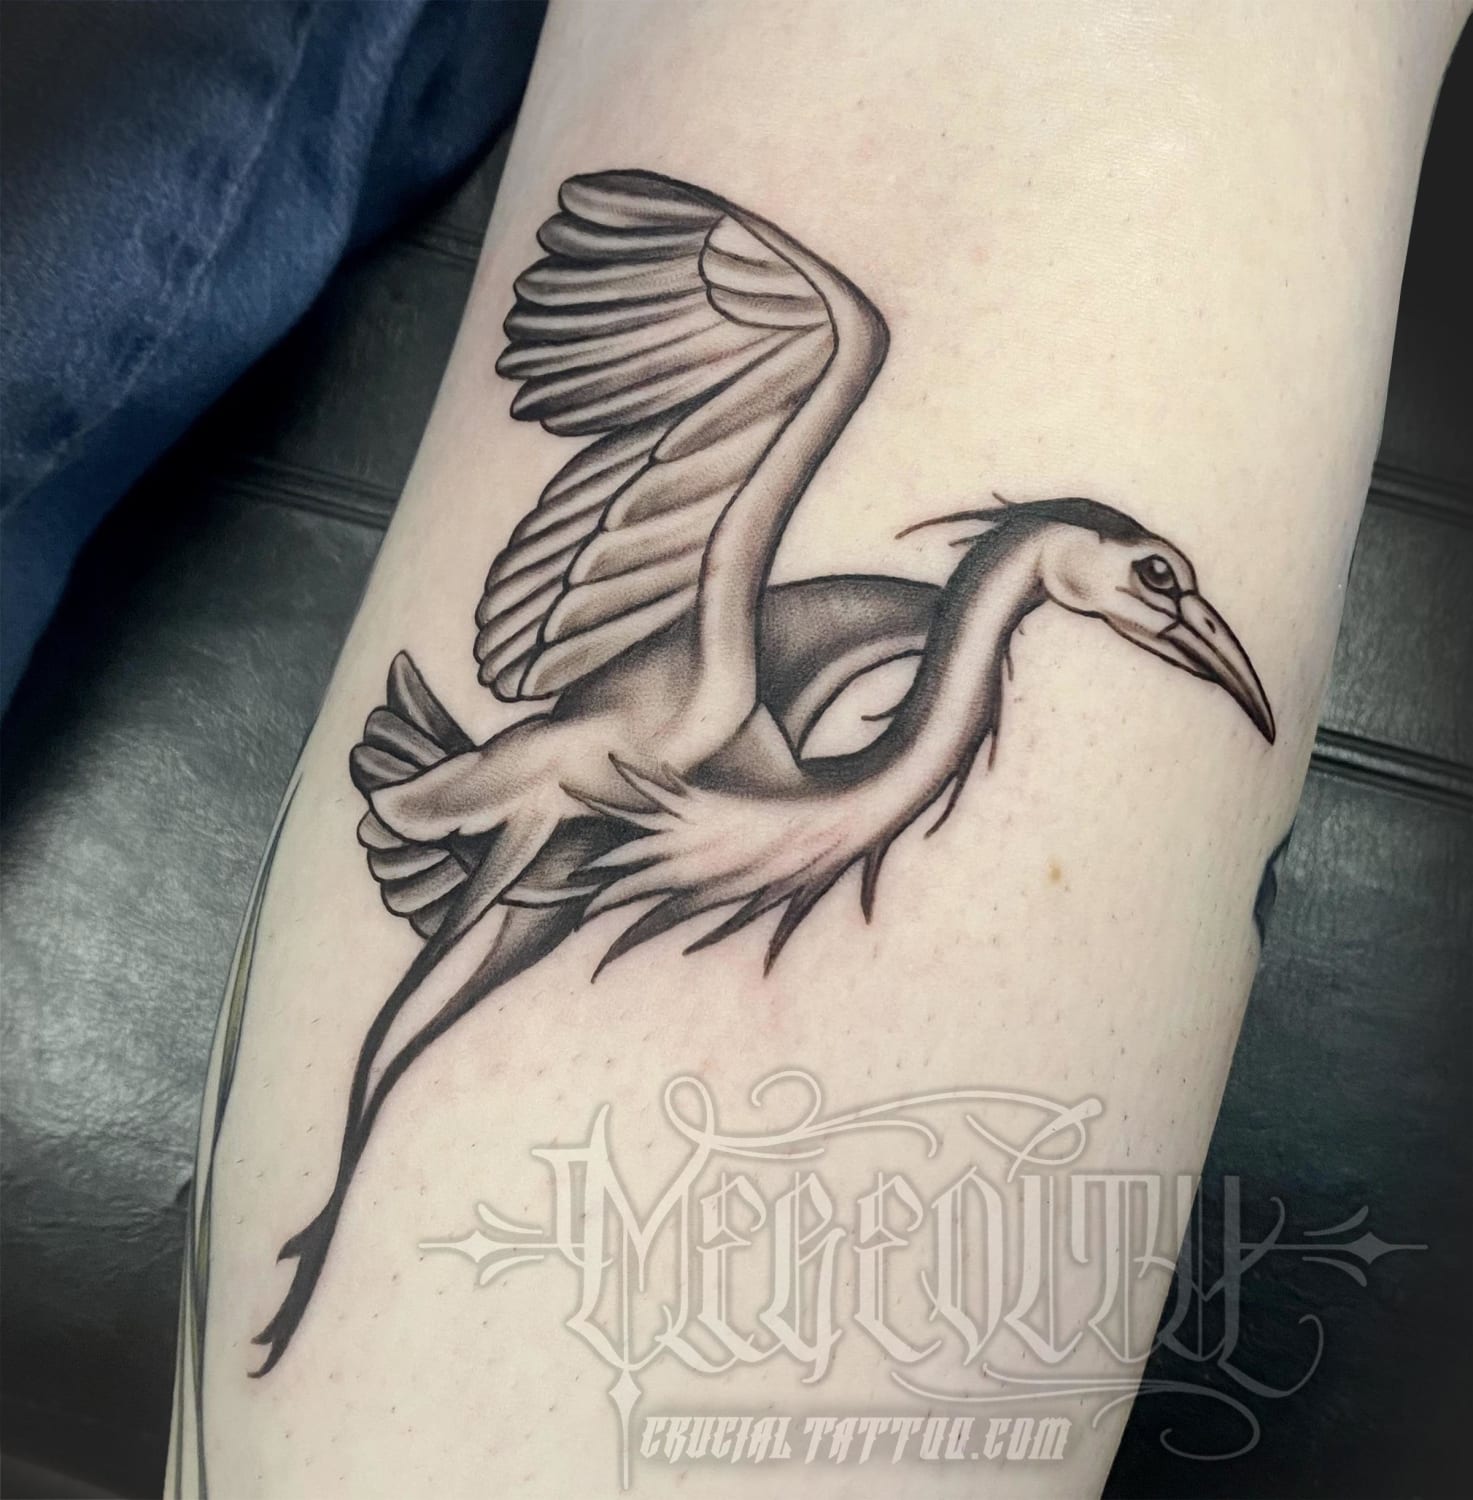 Heron done by me at Crucial Tattoo Studio in Salisbury MD